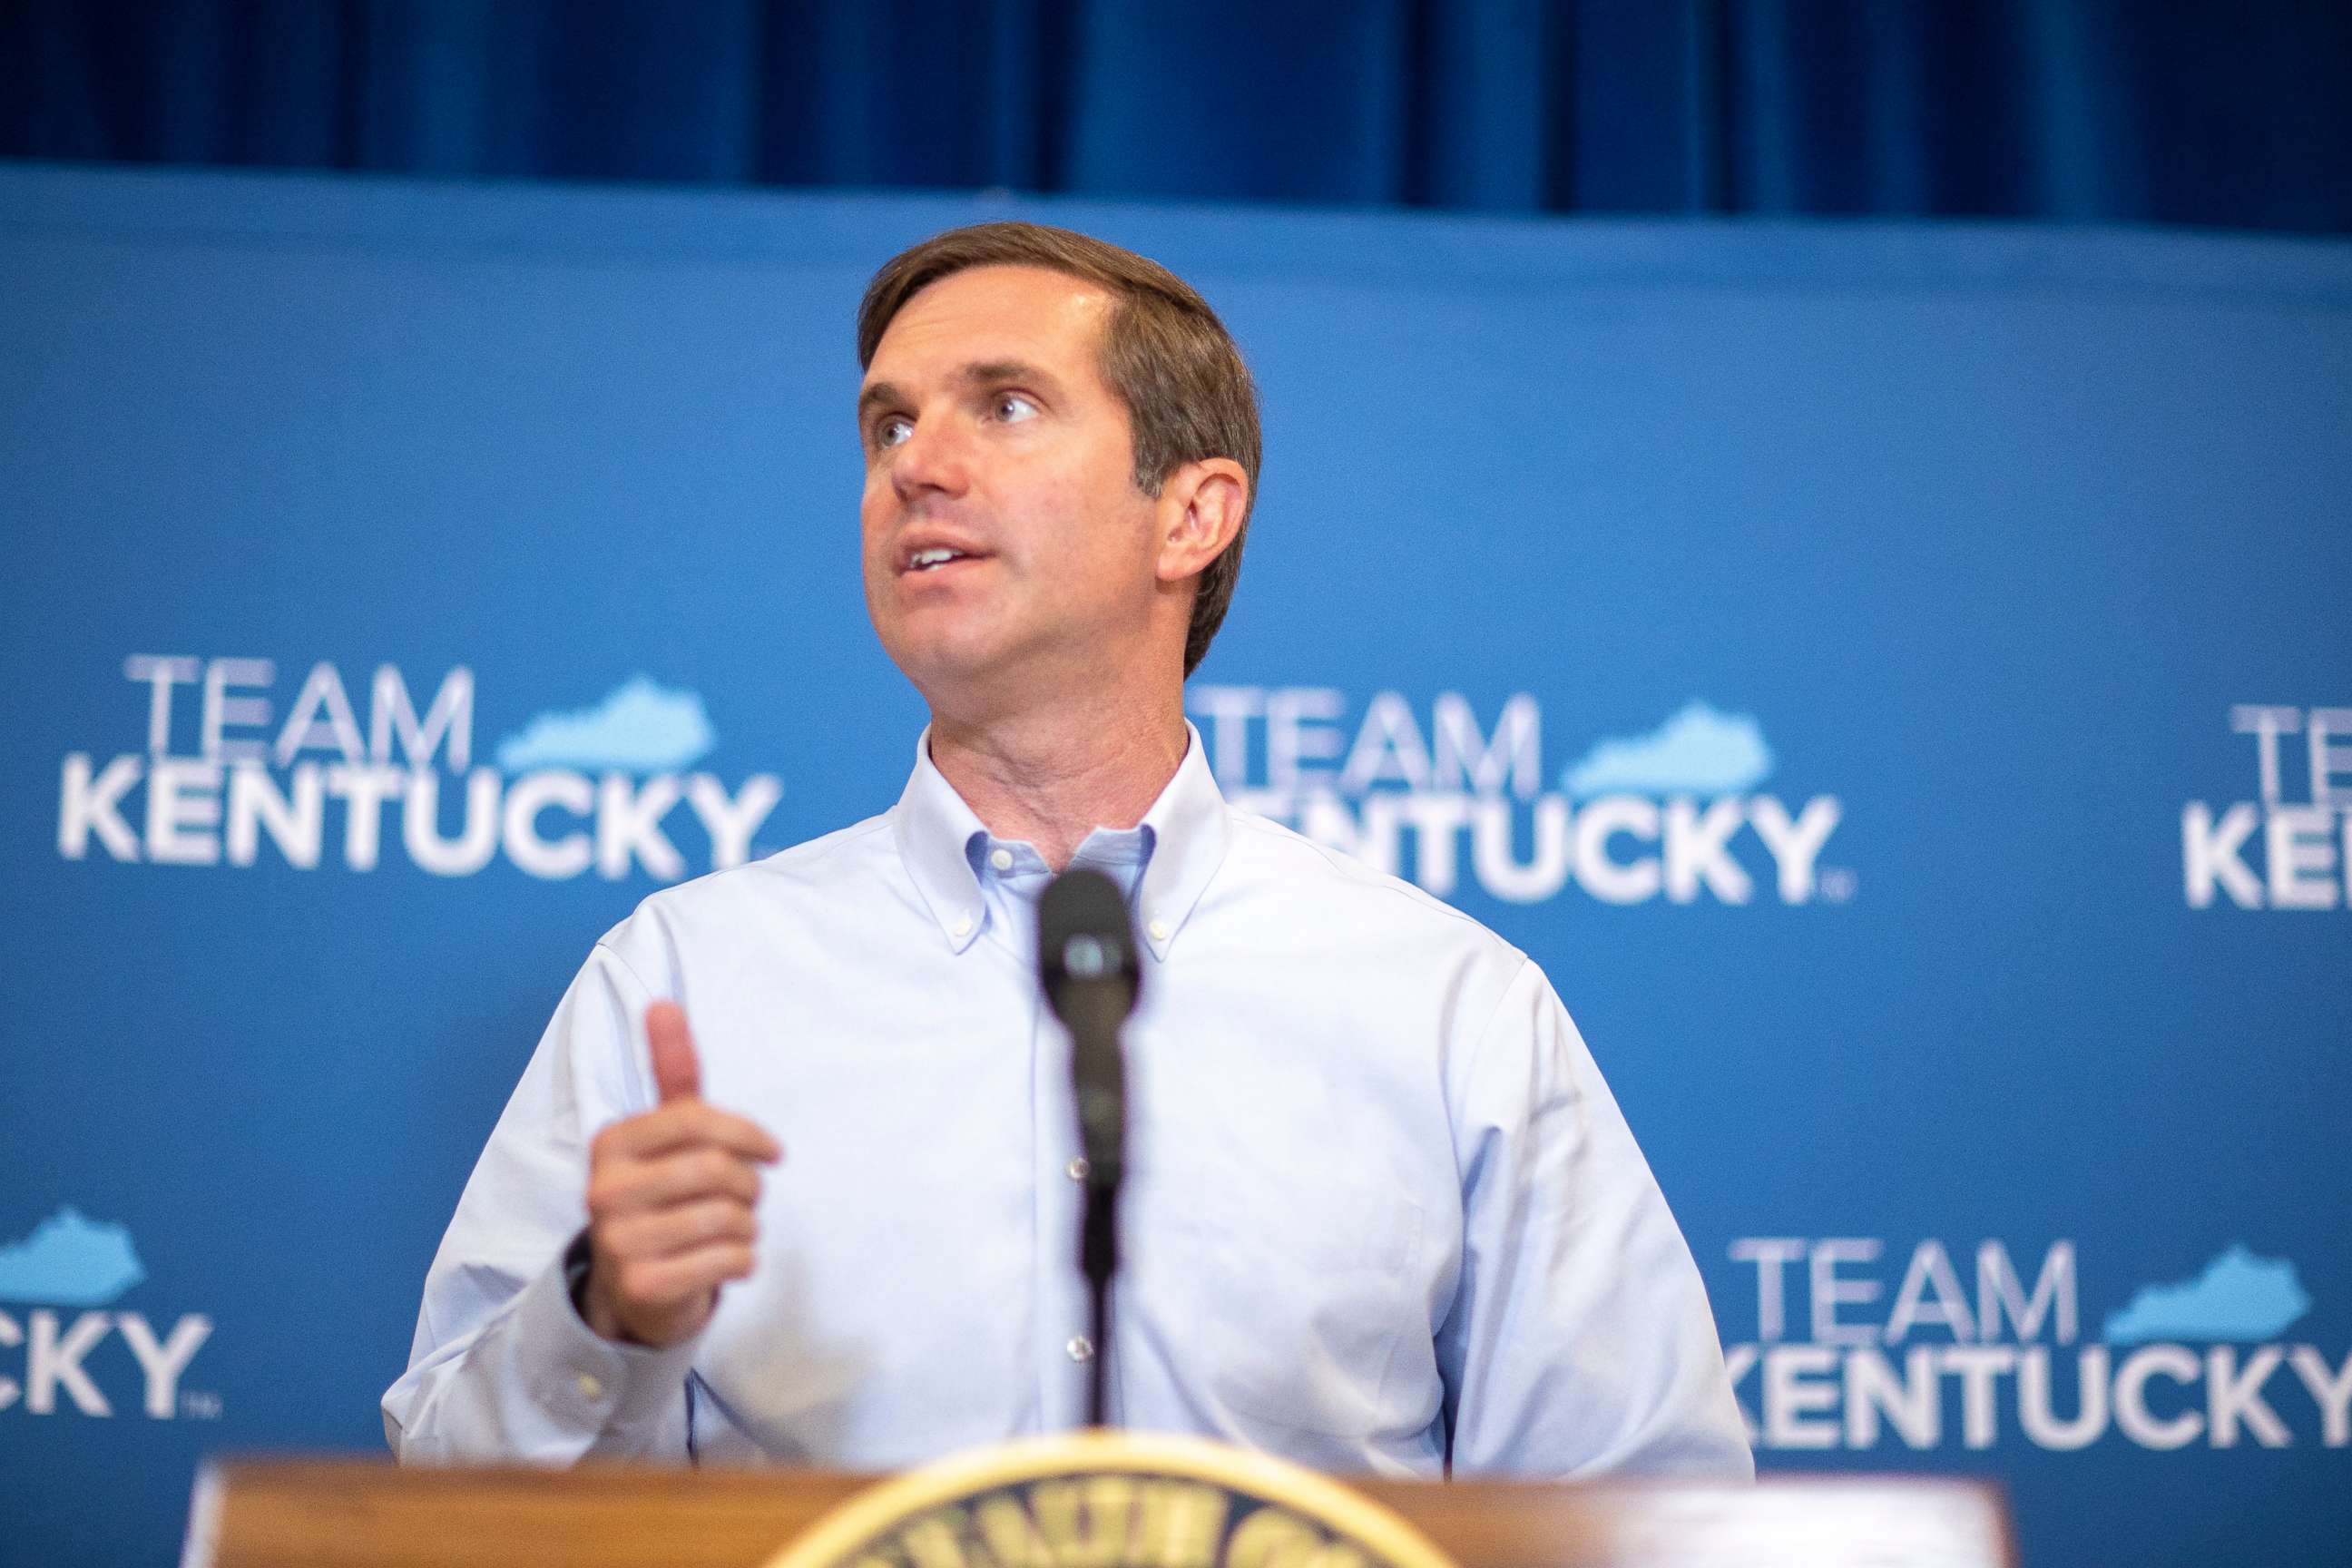 PHOTO: Kentucky Gov. Andy Beshear speaks during a news conference, June 10, 2021 in Frankfort, Ky.